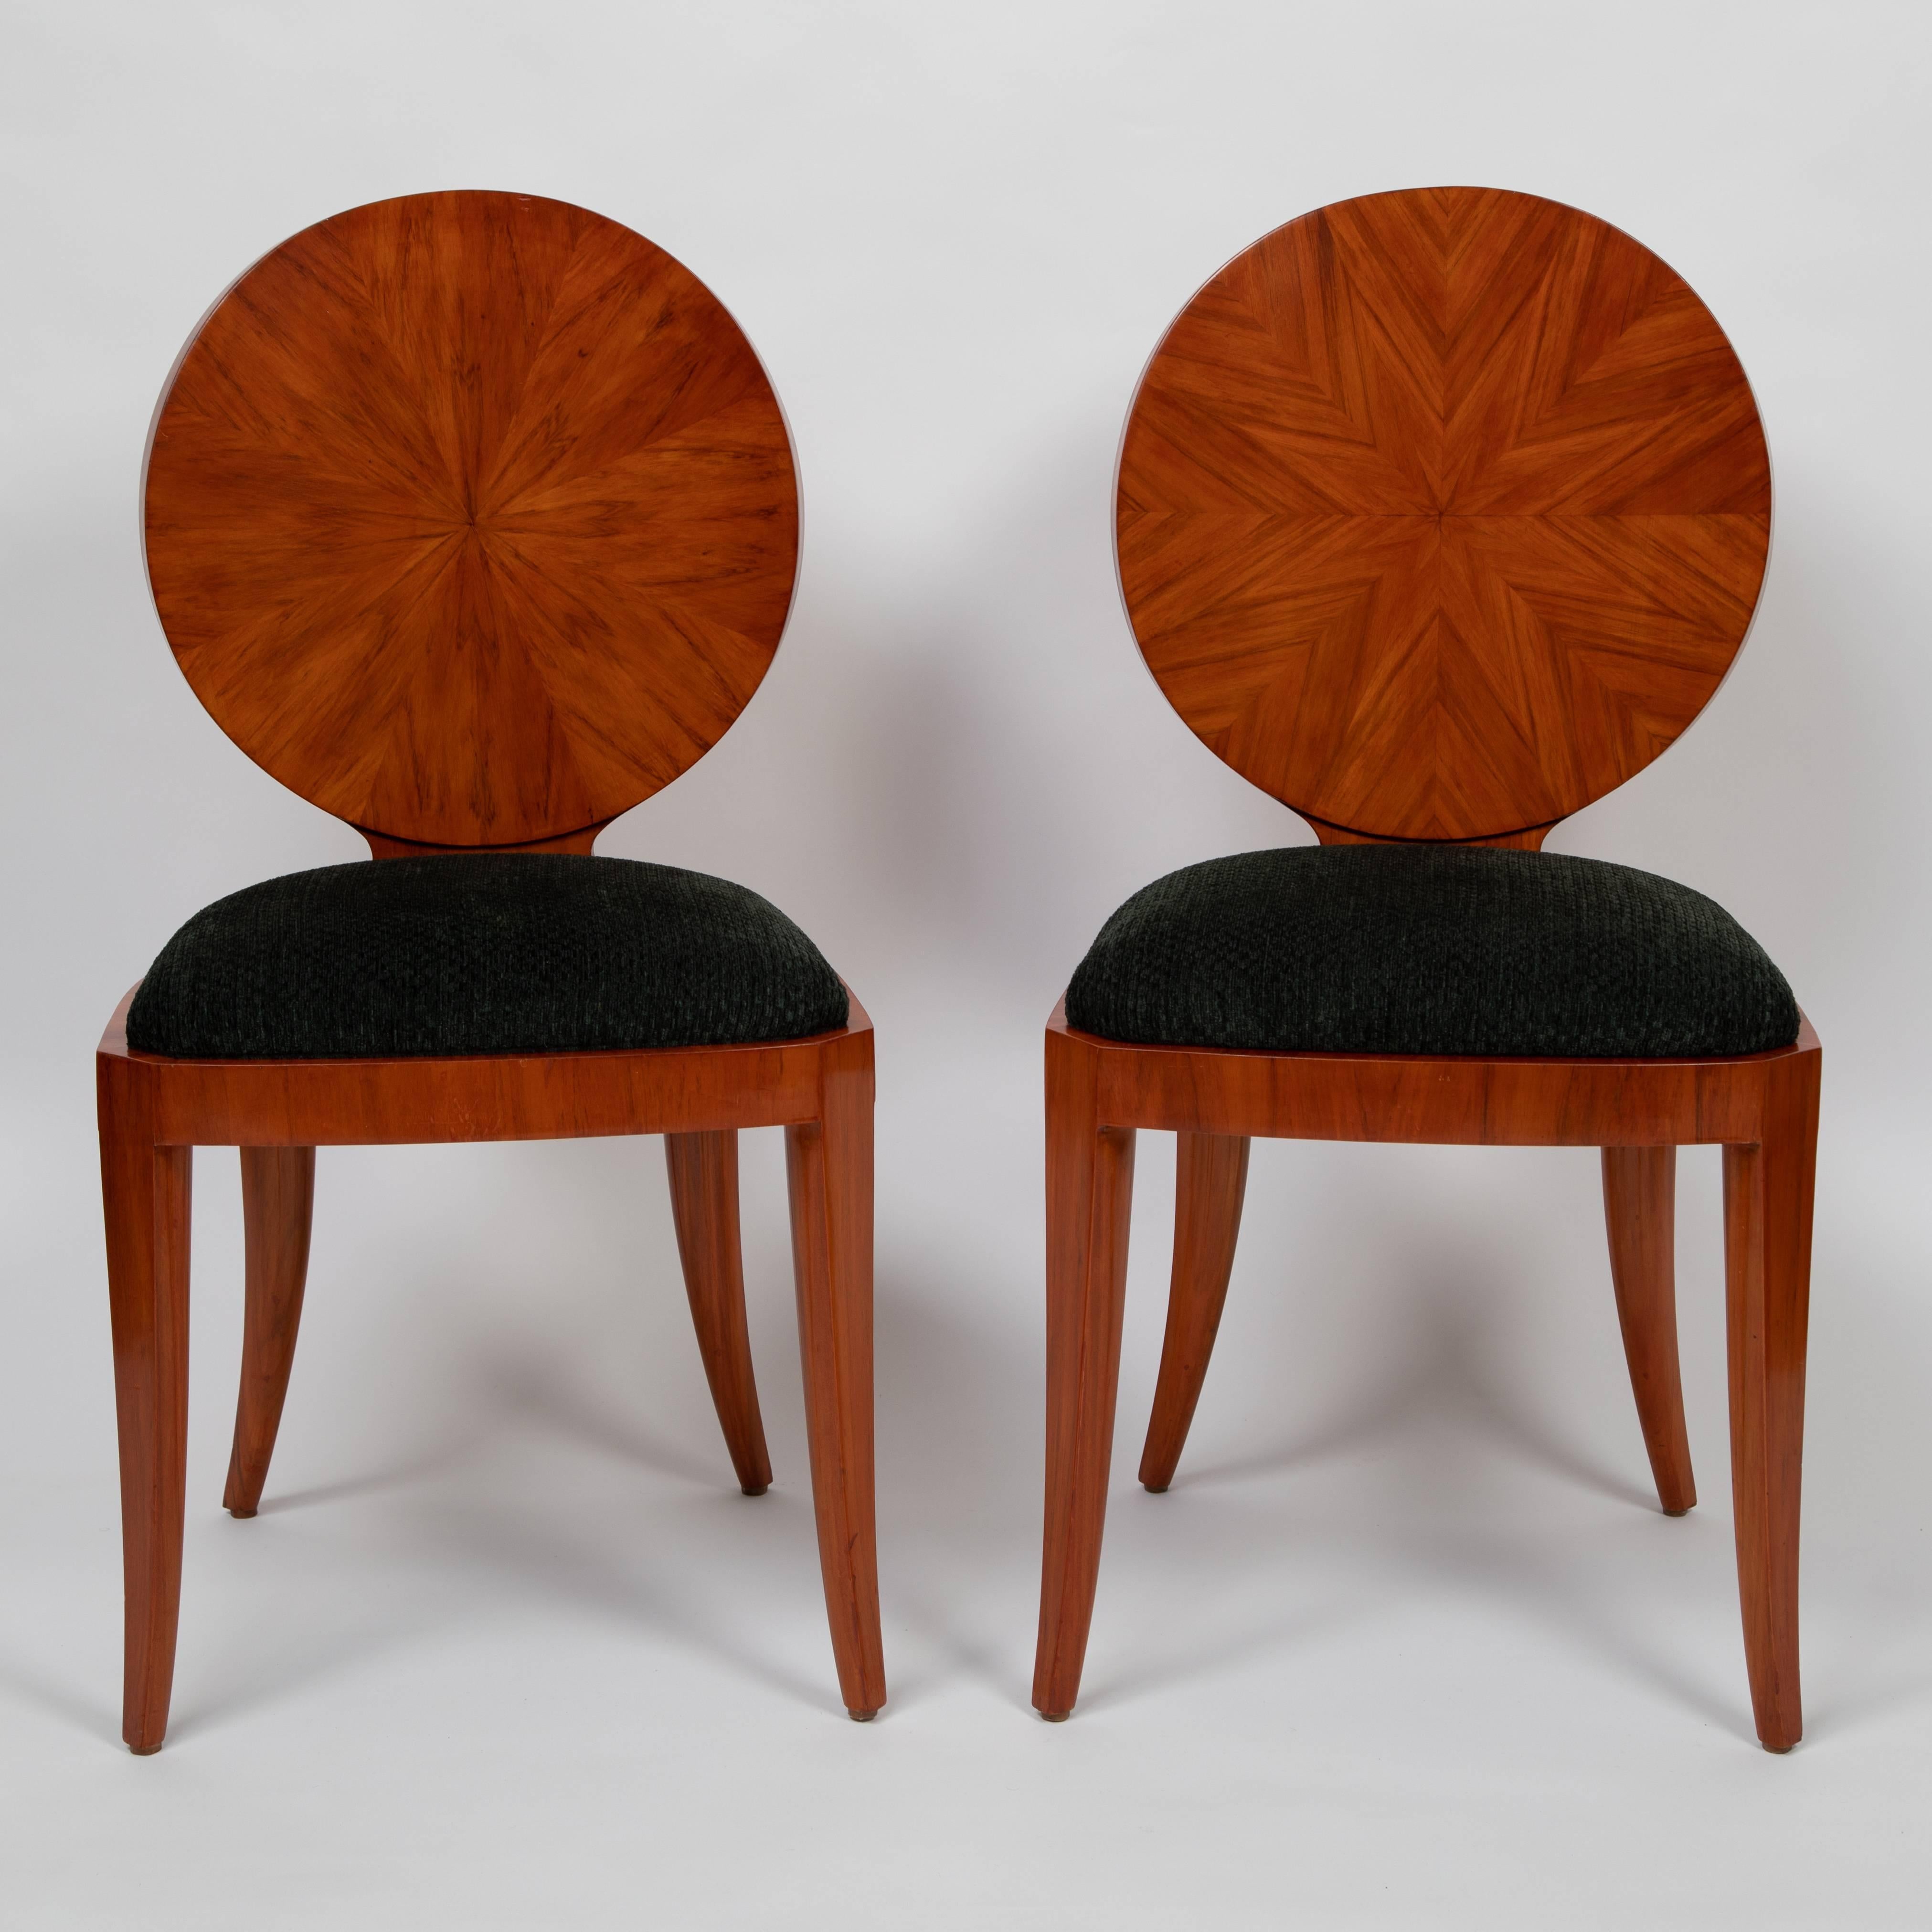 A very rare pair of occasional chairs by Karl Springer in a neoclassical style with a modern twist. The curved, circular backs feature mahogany veneer meticulously applied in two different sunburst patterns. The front and rear legs are flared and